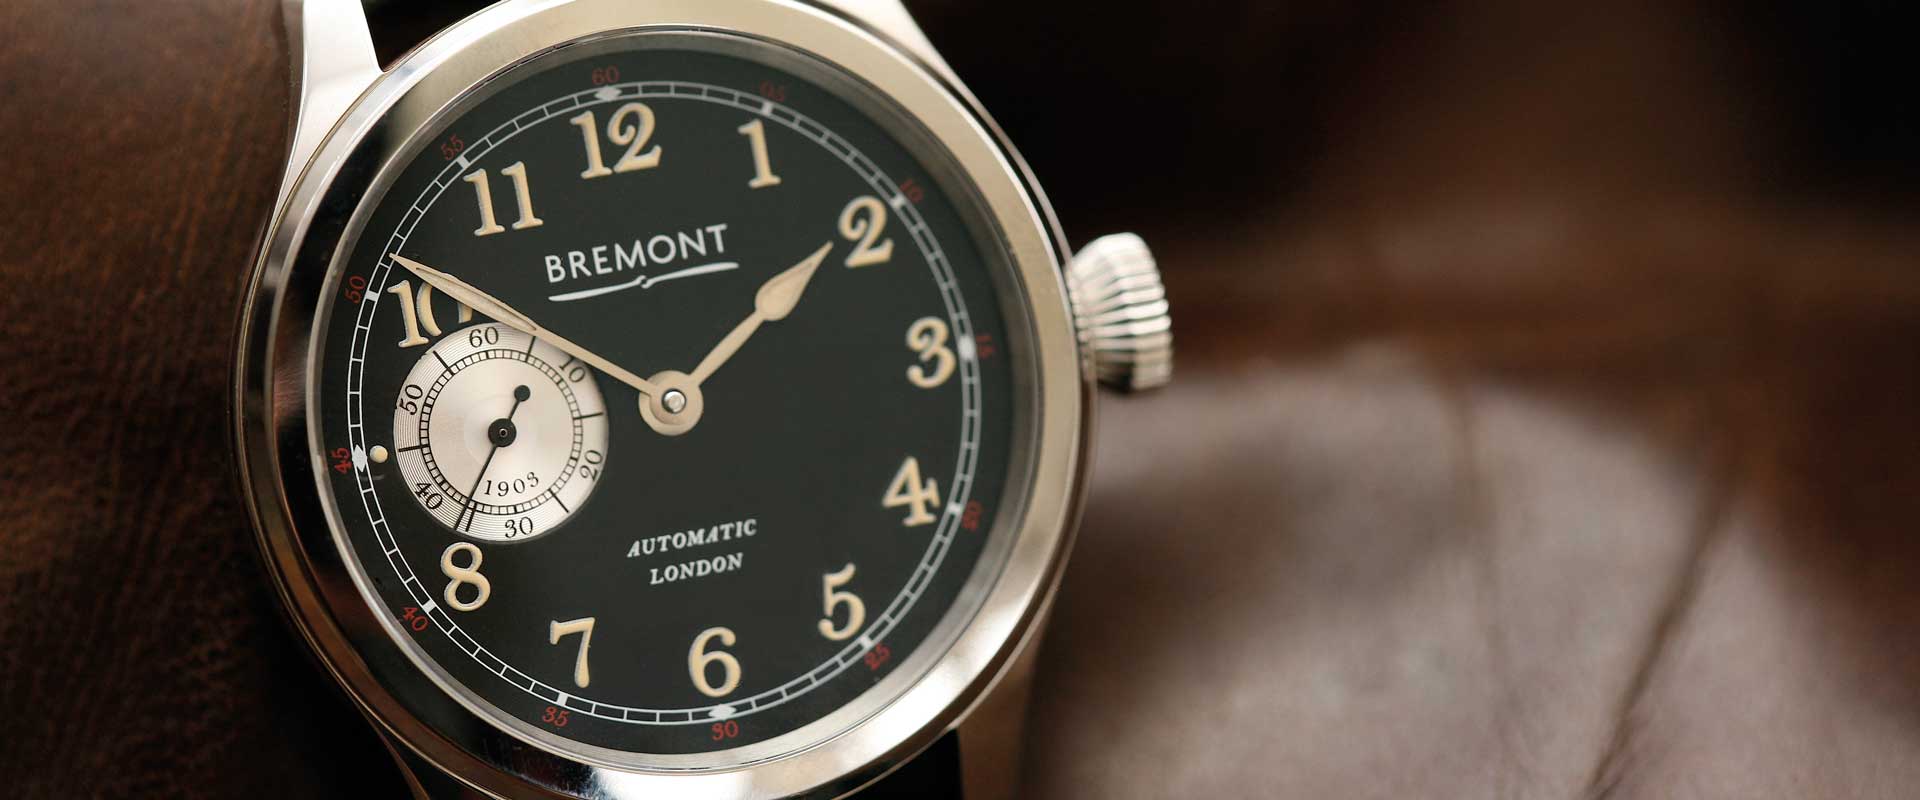 Bremont The Need For Speed